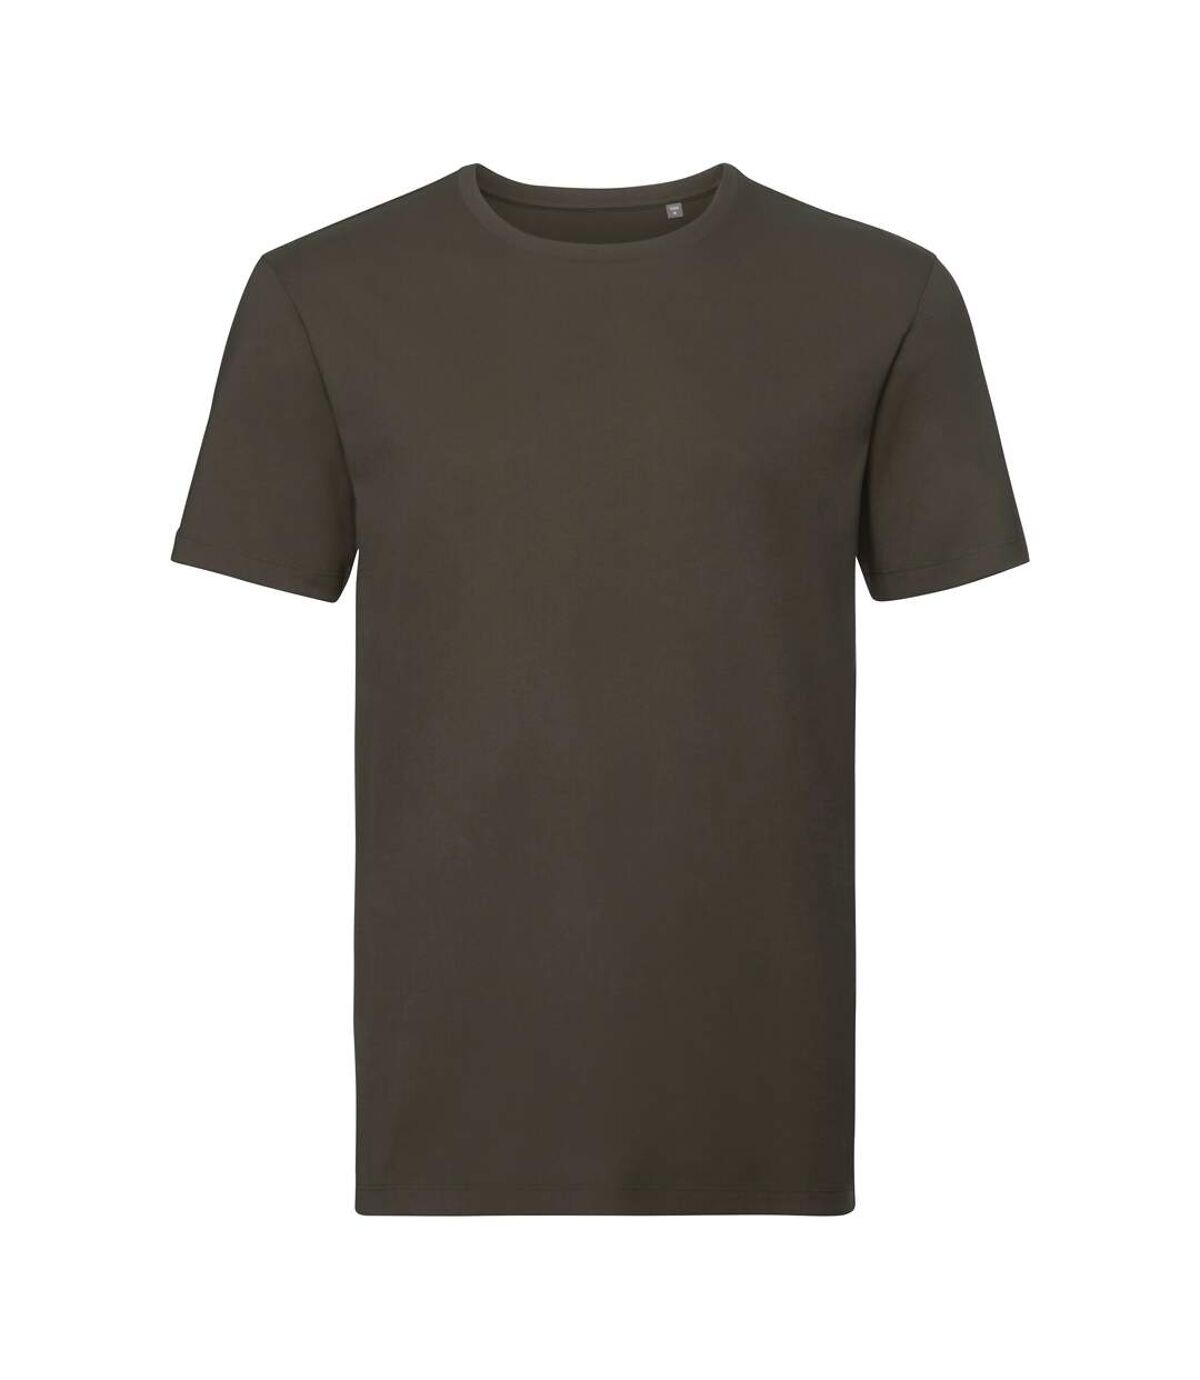 Russell - T-shirt manches courtes AUTHENTIC - Homme (Marron) - UTPC3569